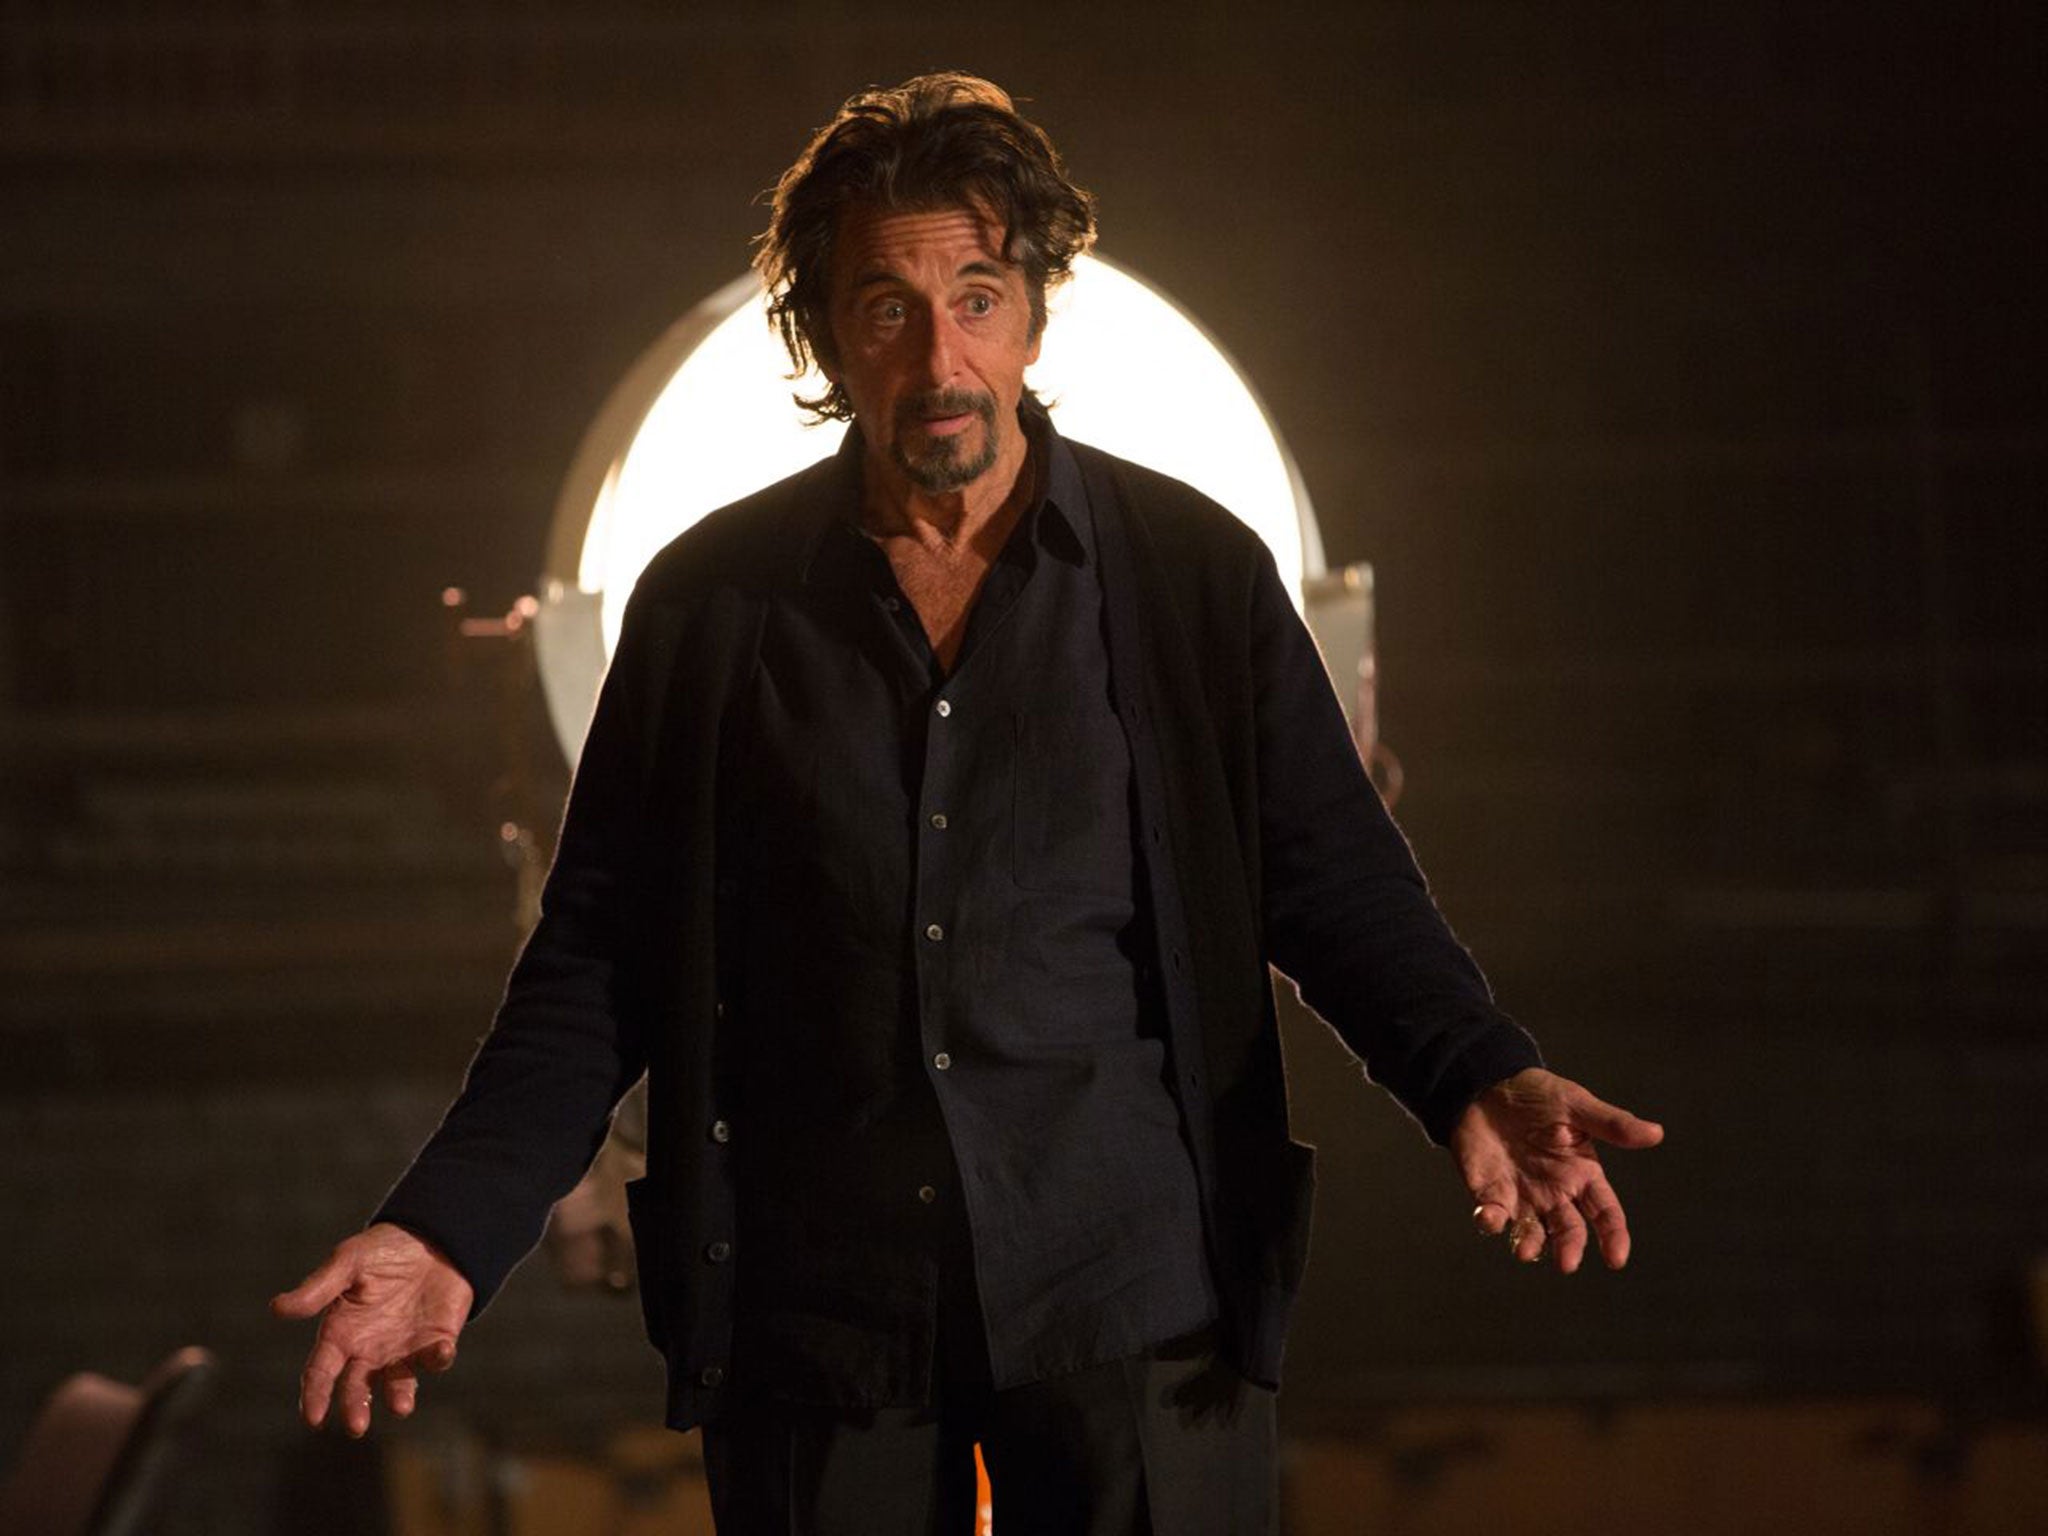 Al Pacino in ‘The Humbling’, as an ageing actor